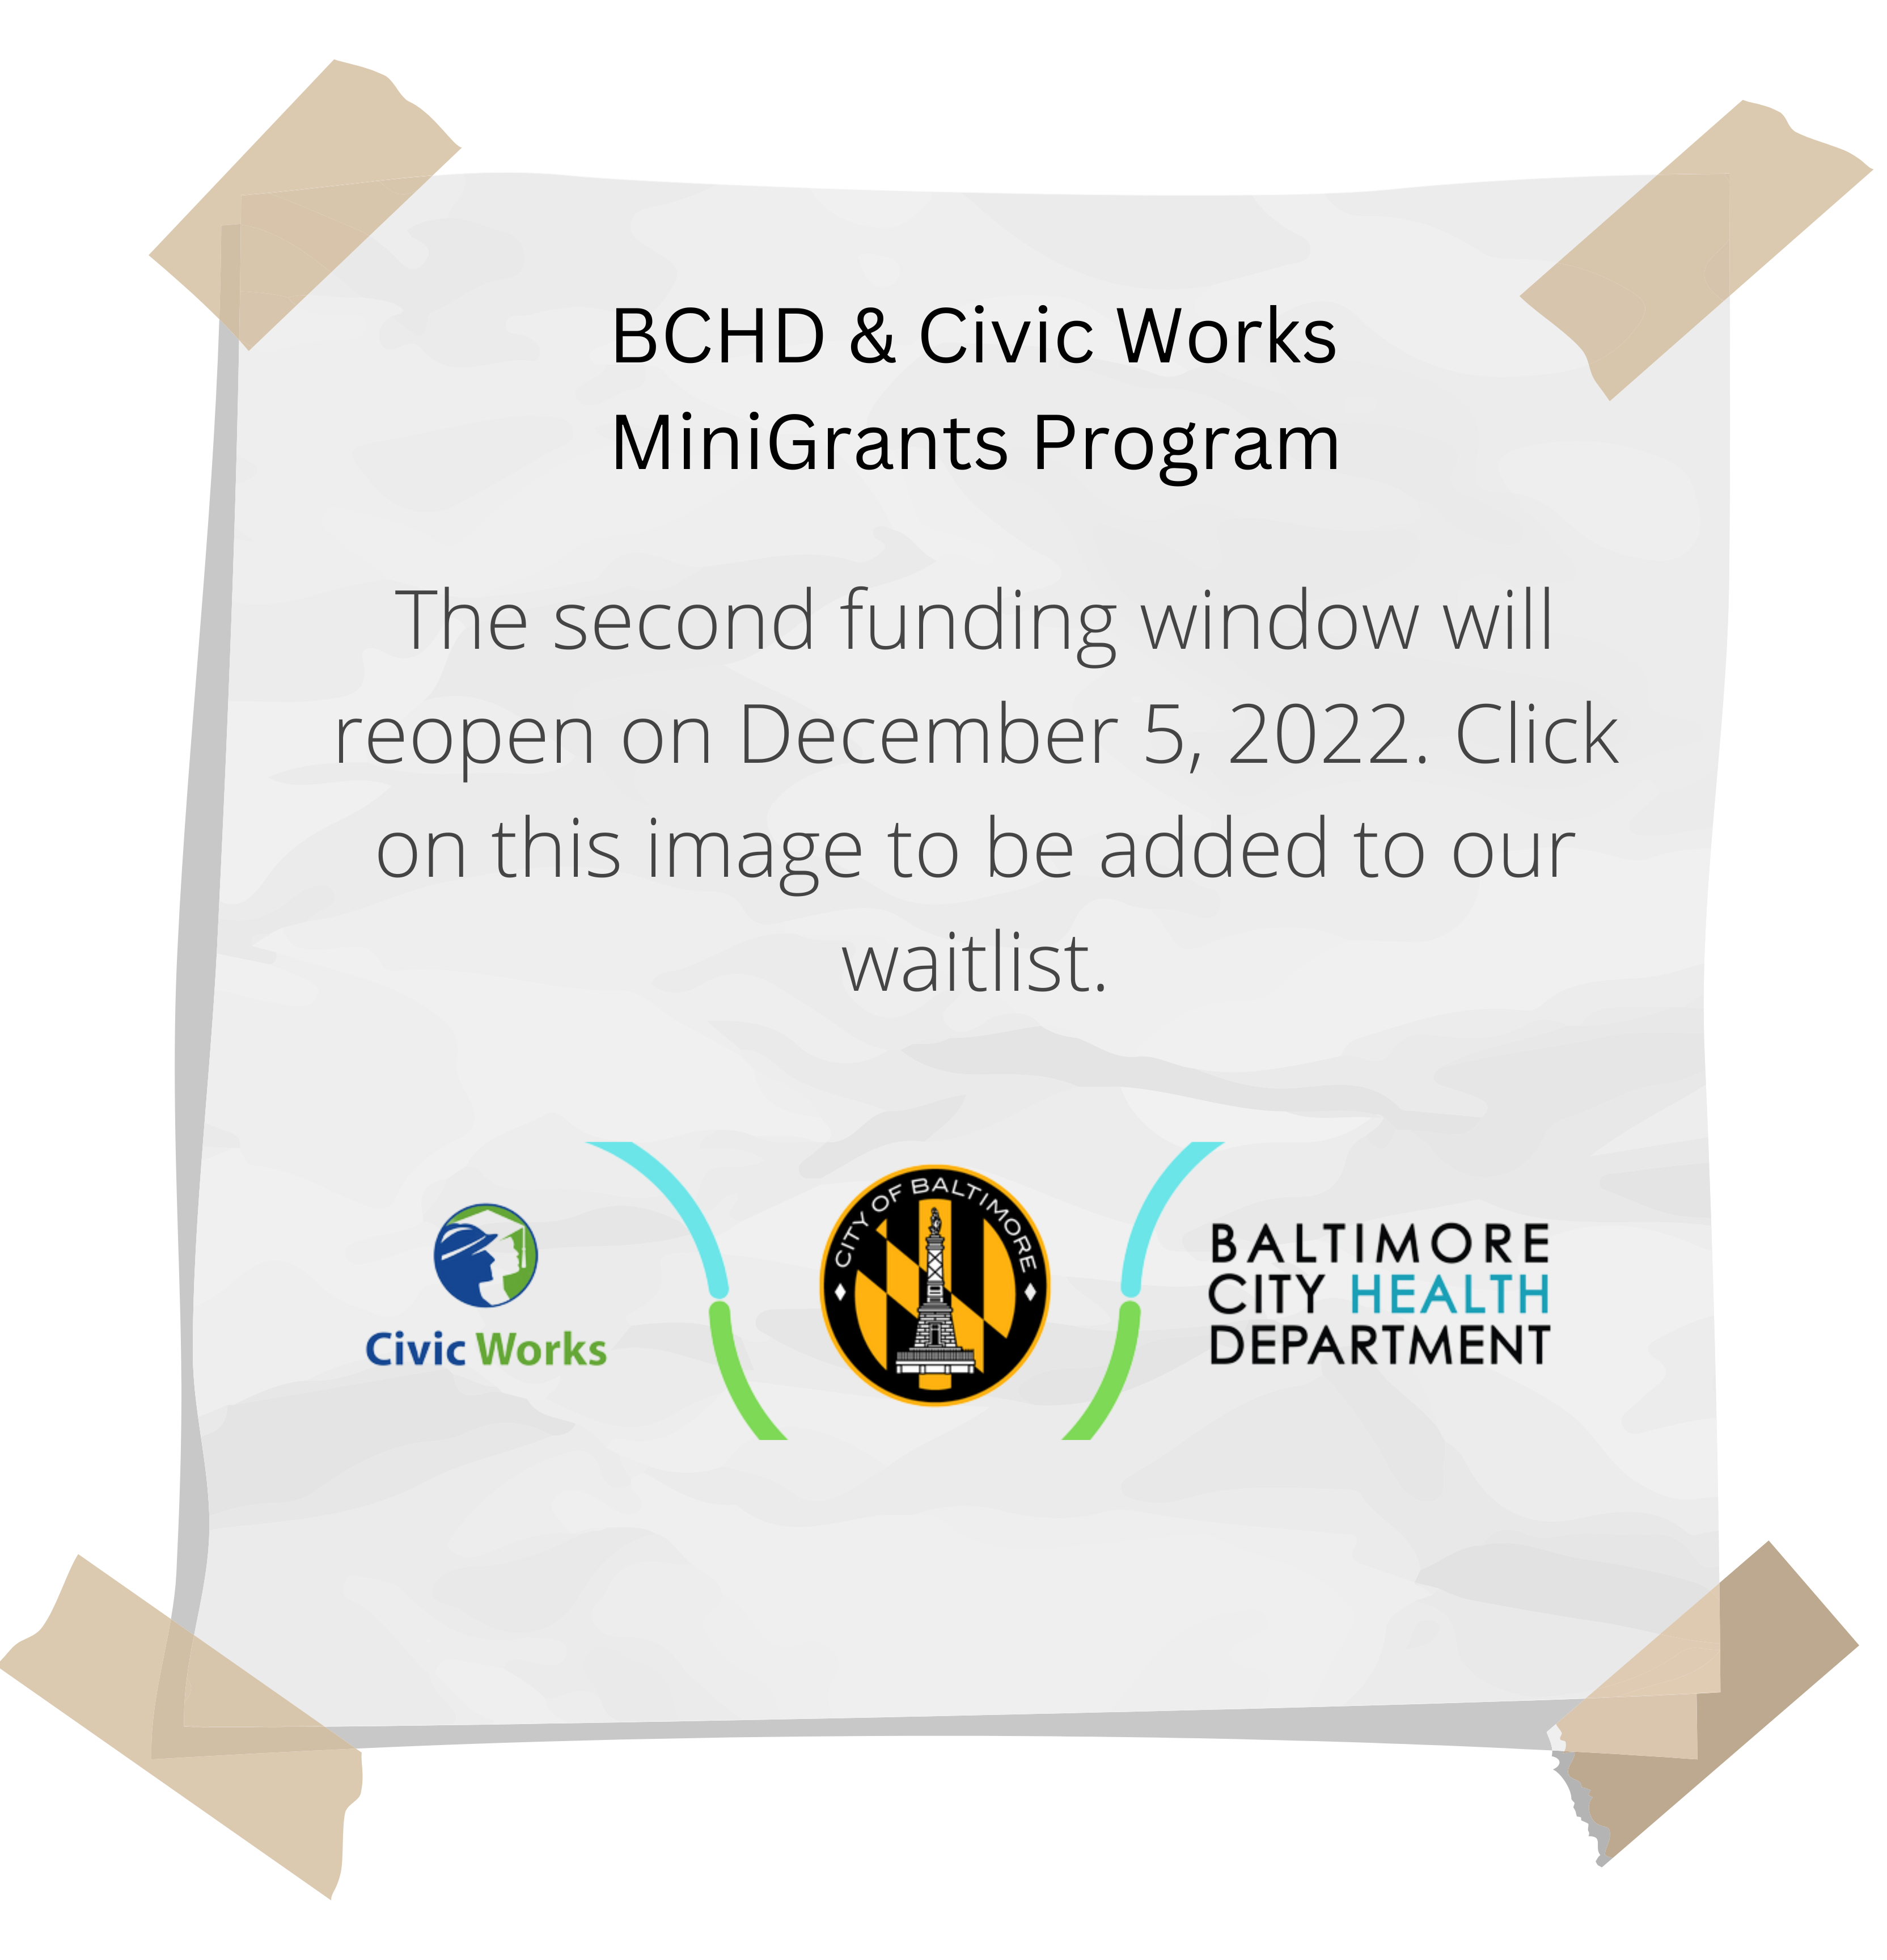 The second funding window will repoen on December 5, 2022.